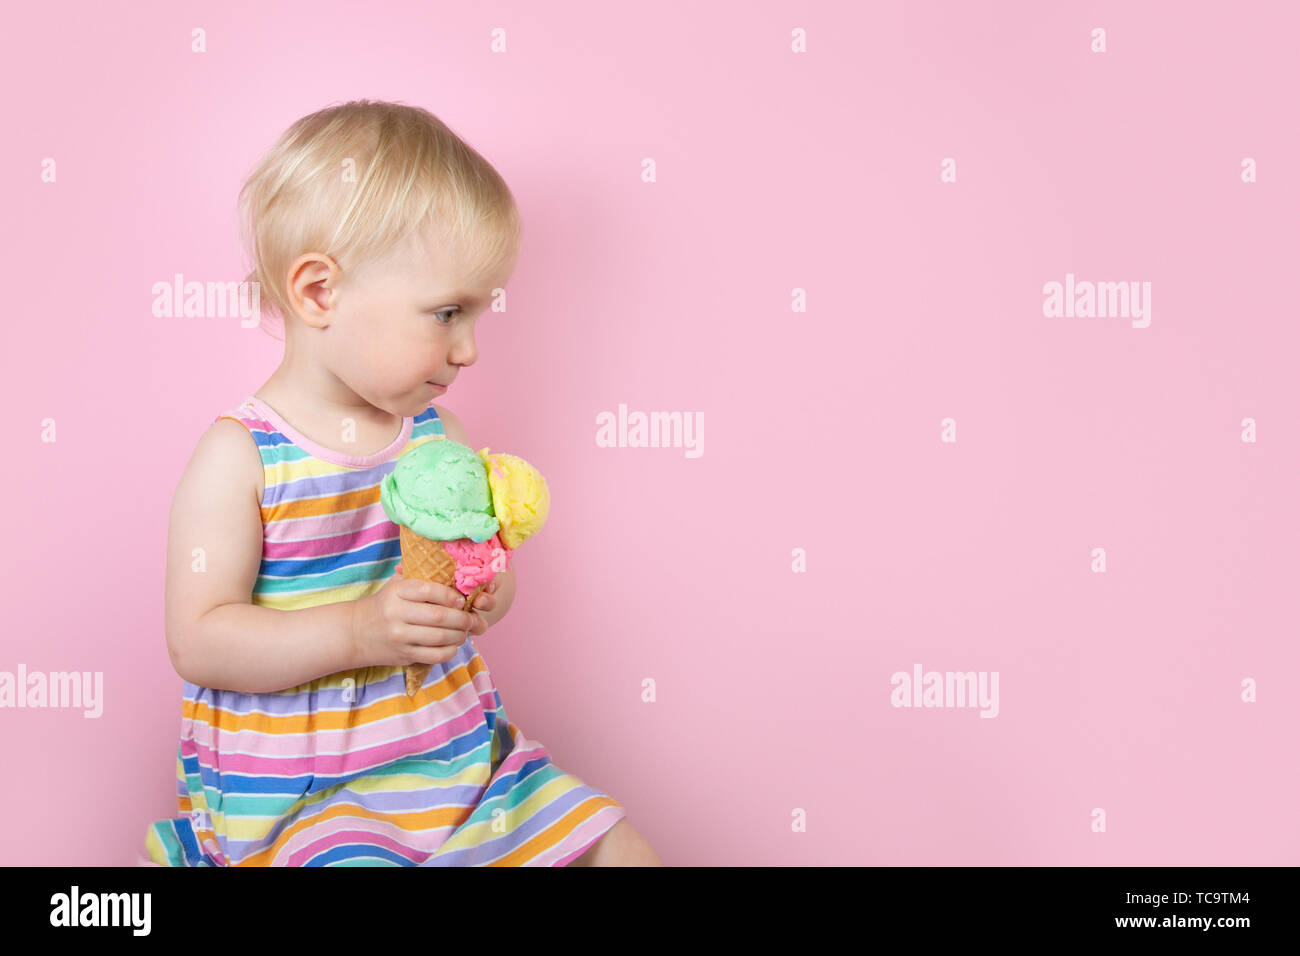 Pretty girl eating ice cream in front of pink background Stock Photo